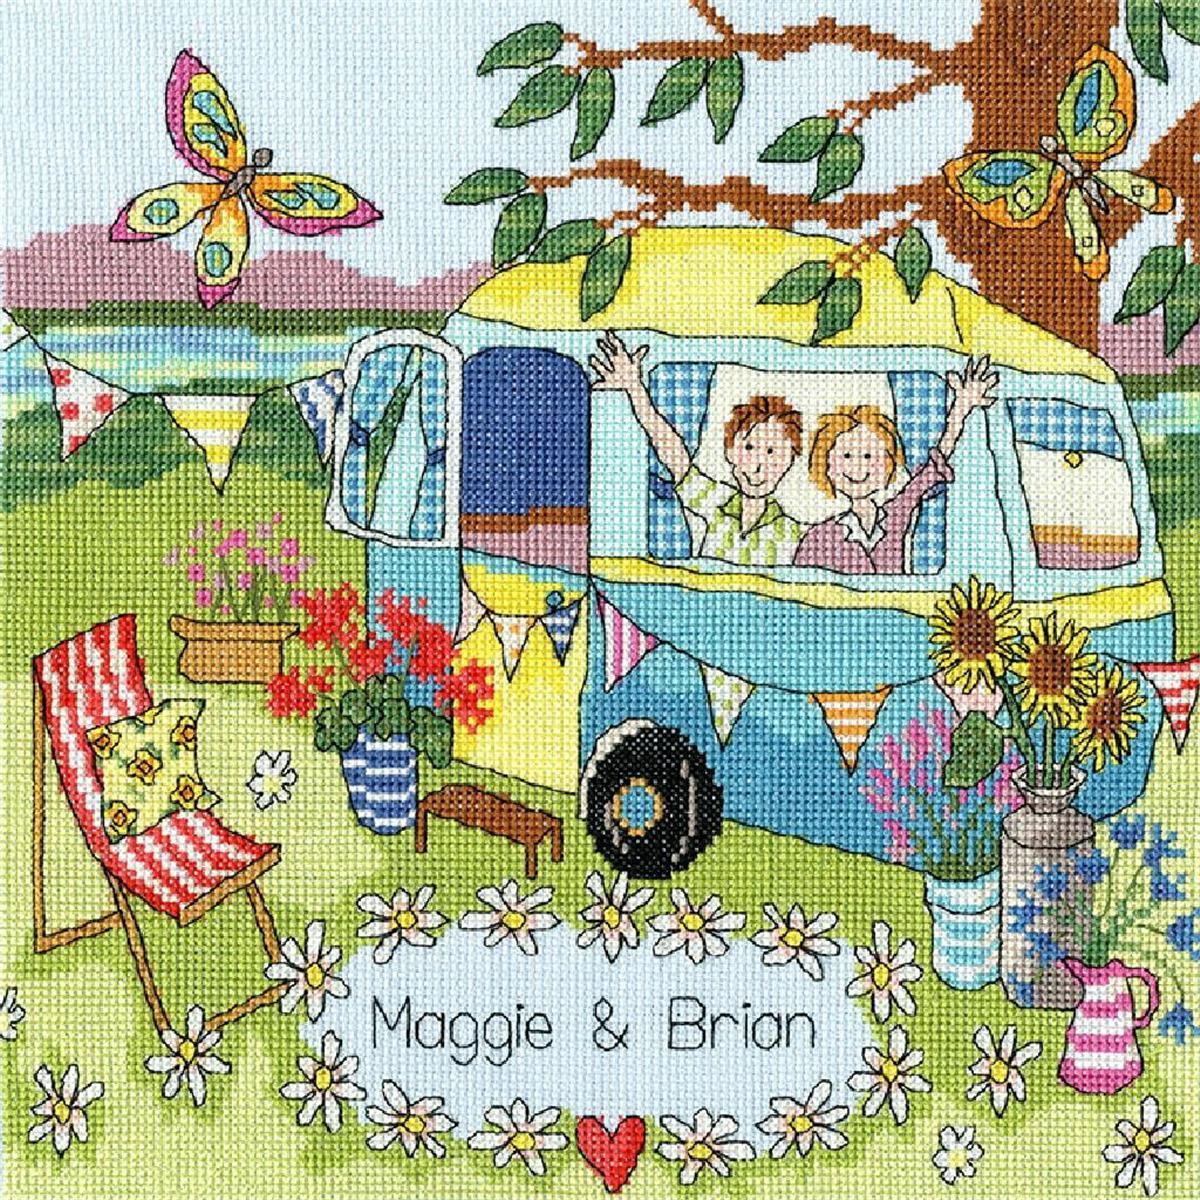 A brightly embroidered embroidery pack from Bothy Threads...